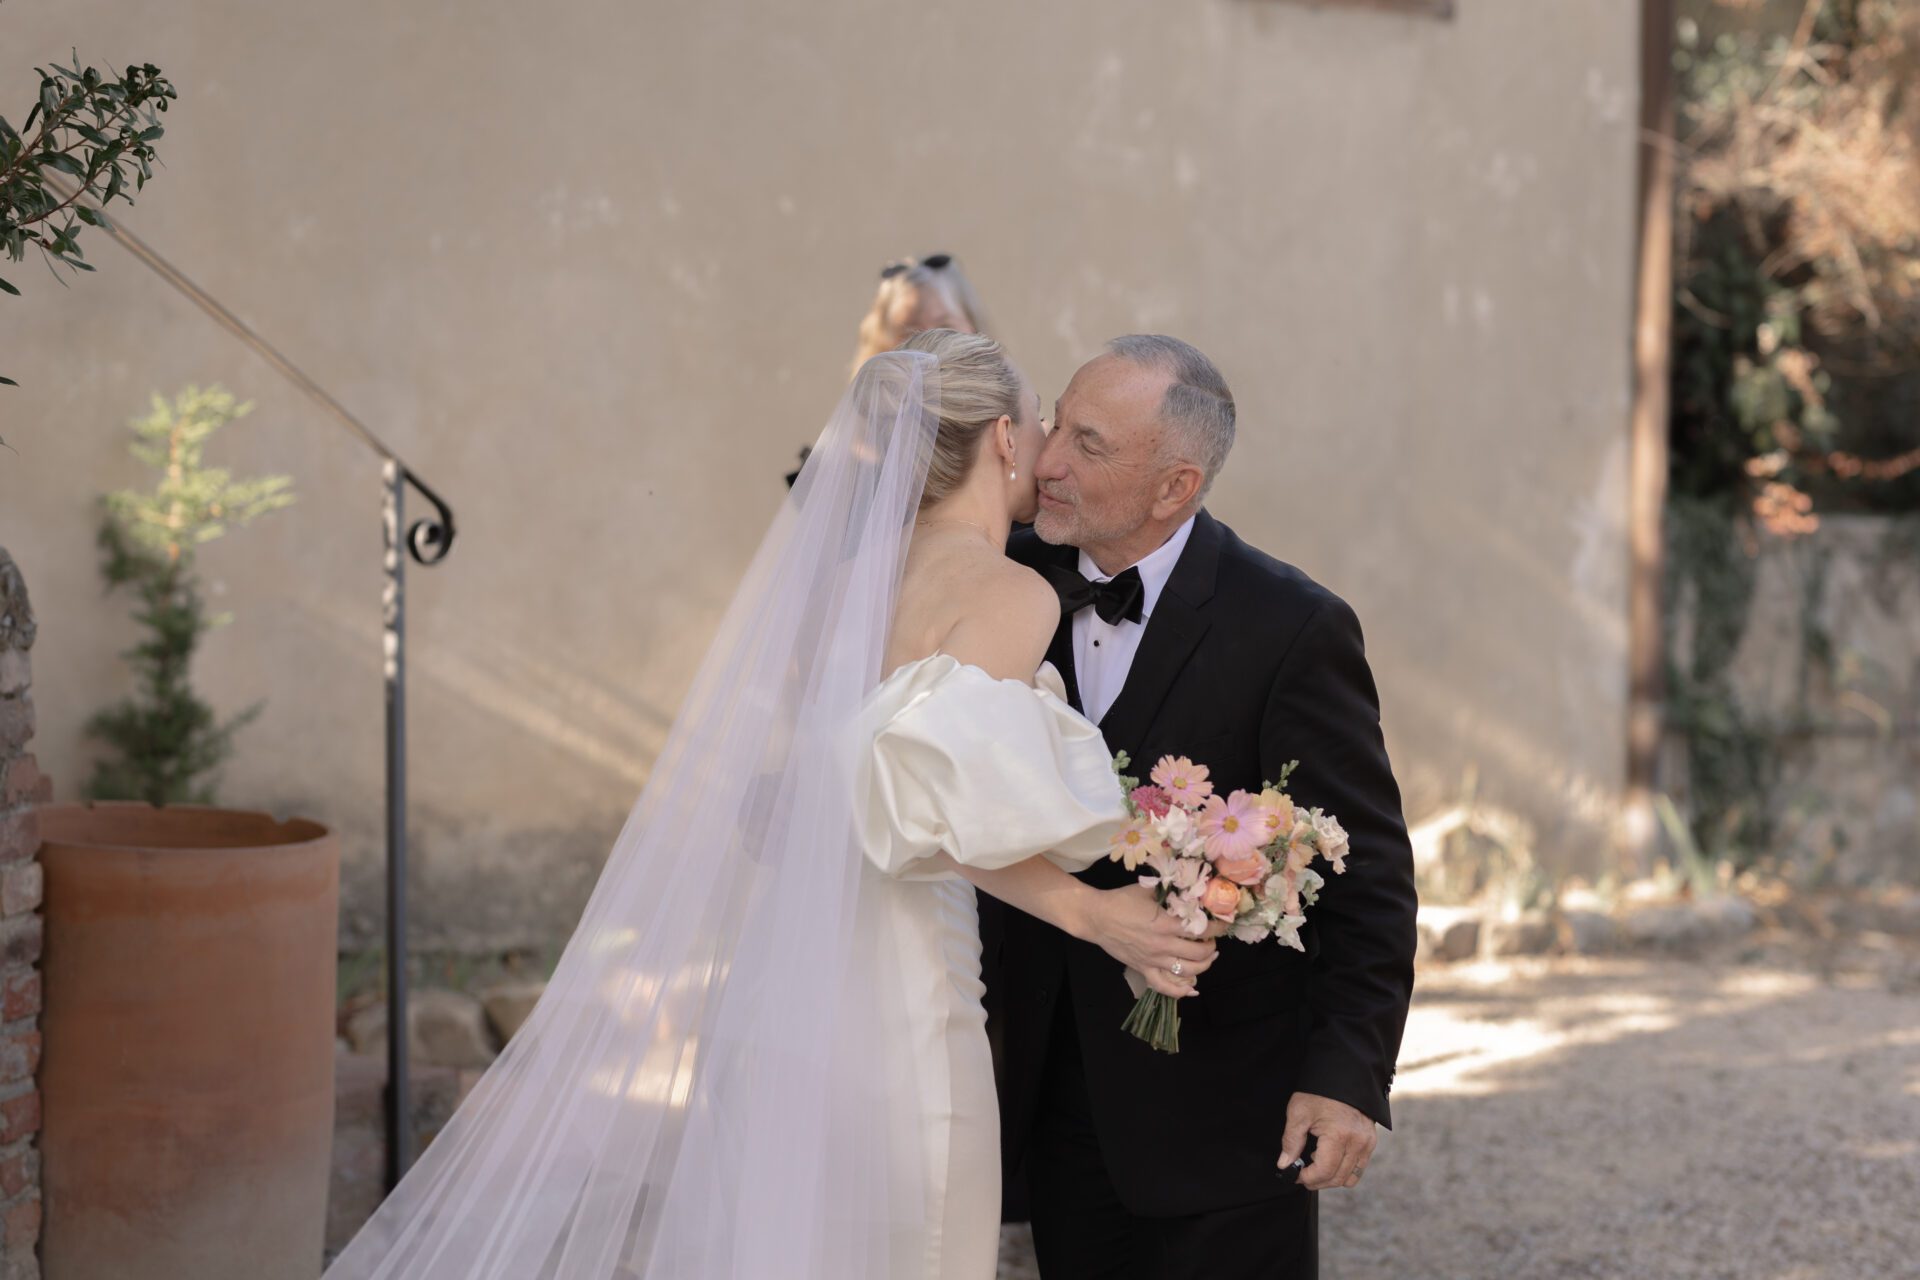 The bride shares an embrace with her father at her Tuscan wedding